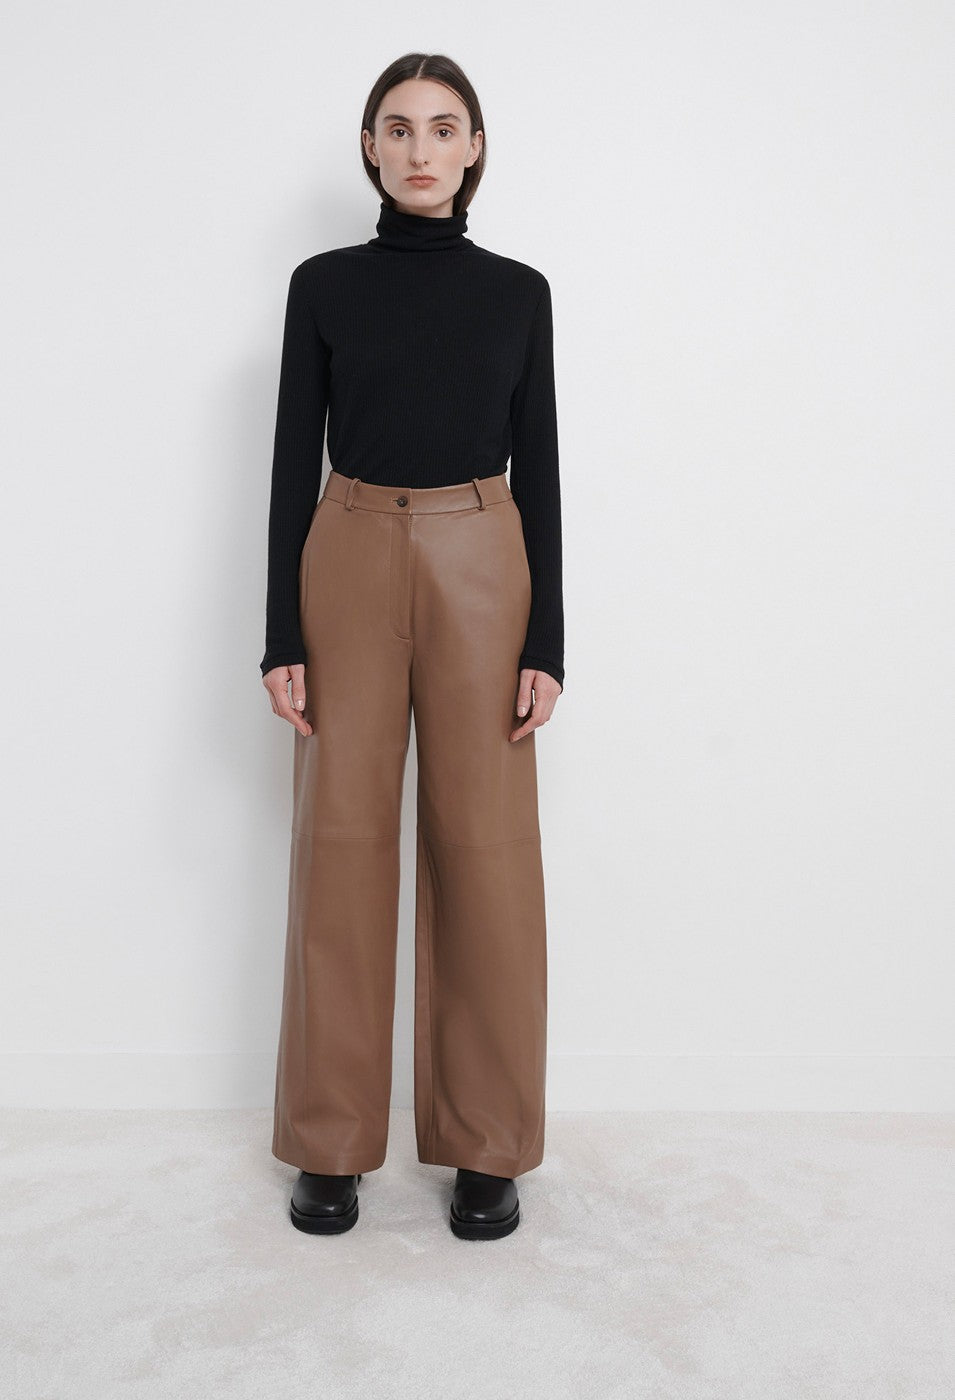 LouLou Studio Noro Leather Pants - Camel